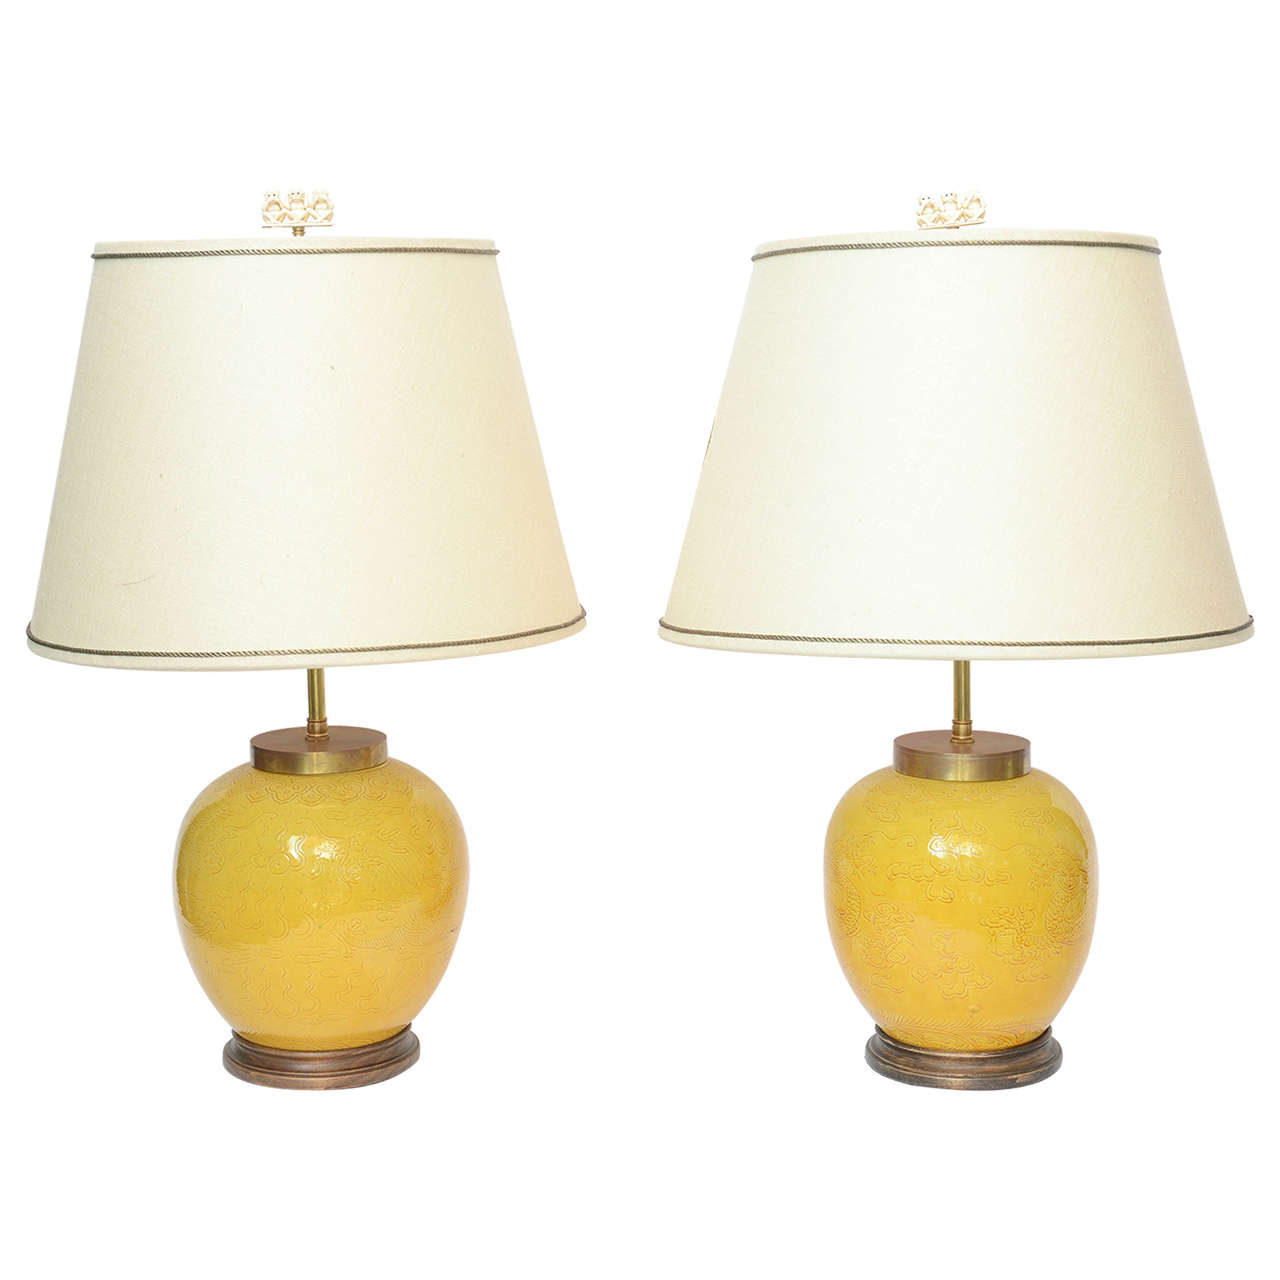 Pair of Chinese Porcelain Round Yellow Vase Lamps, circa 18th Century For Sale